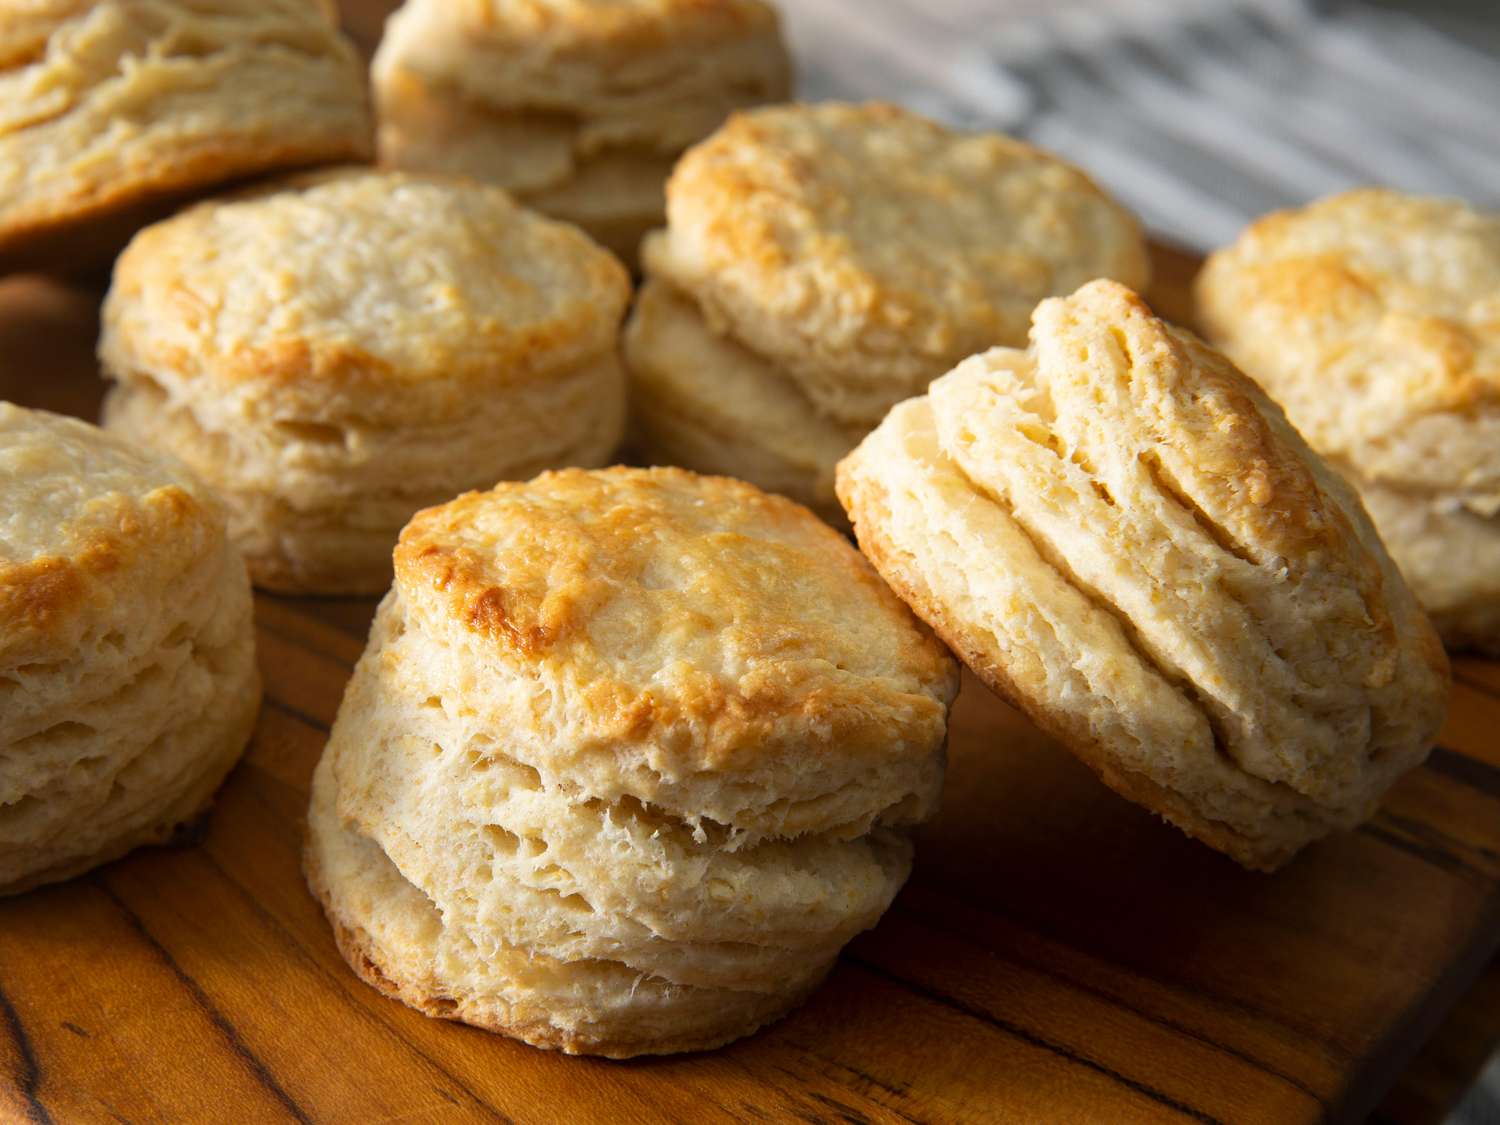 How To Store Cooked Pillsbury Biscuits